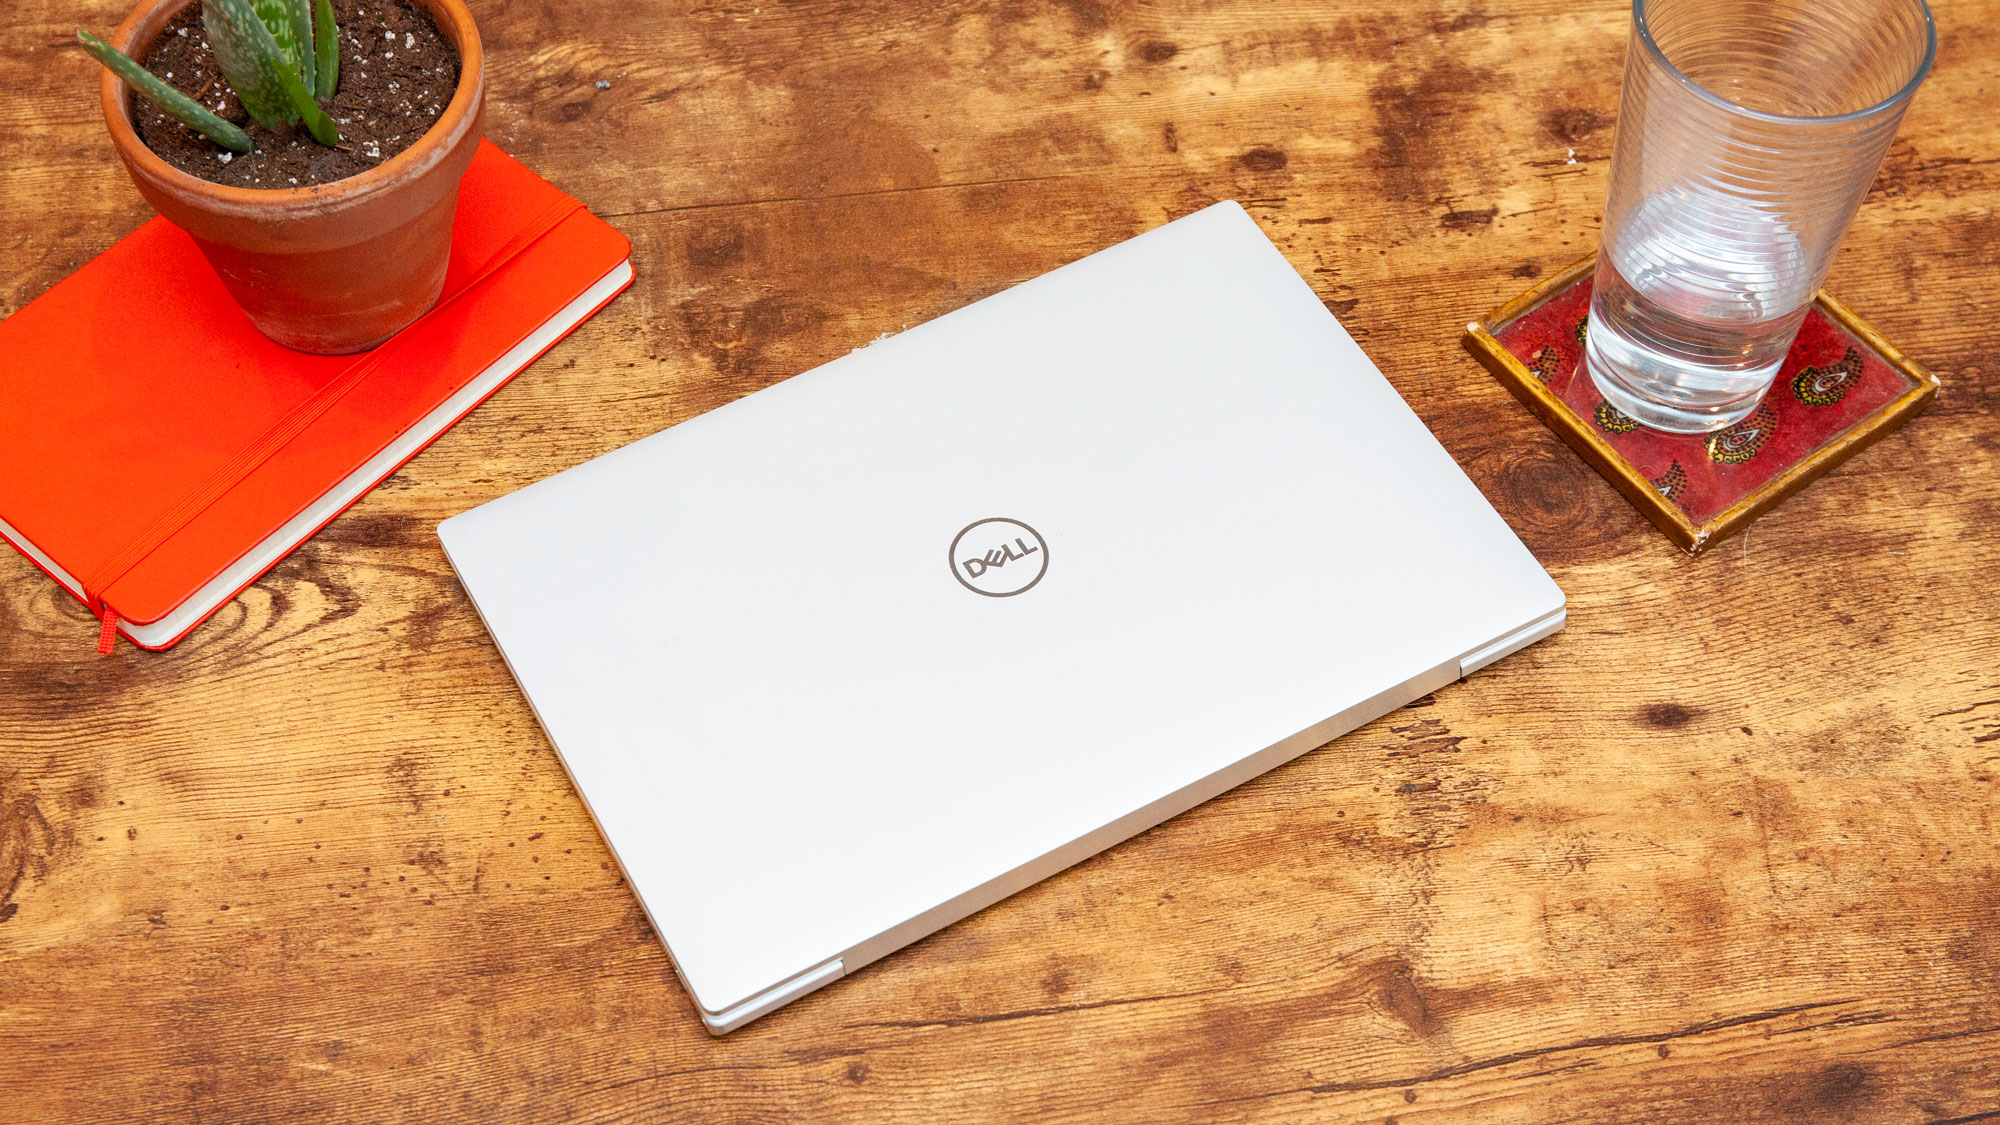 What to Look for When Buying a High-Performance Laptop